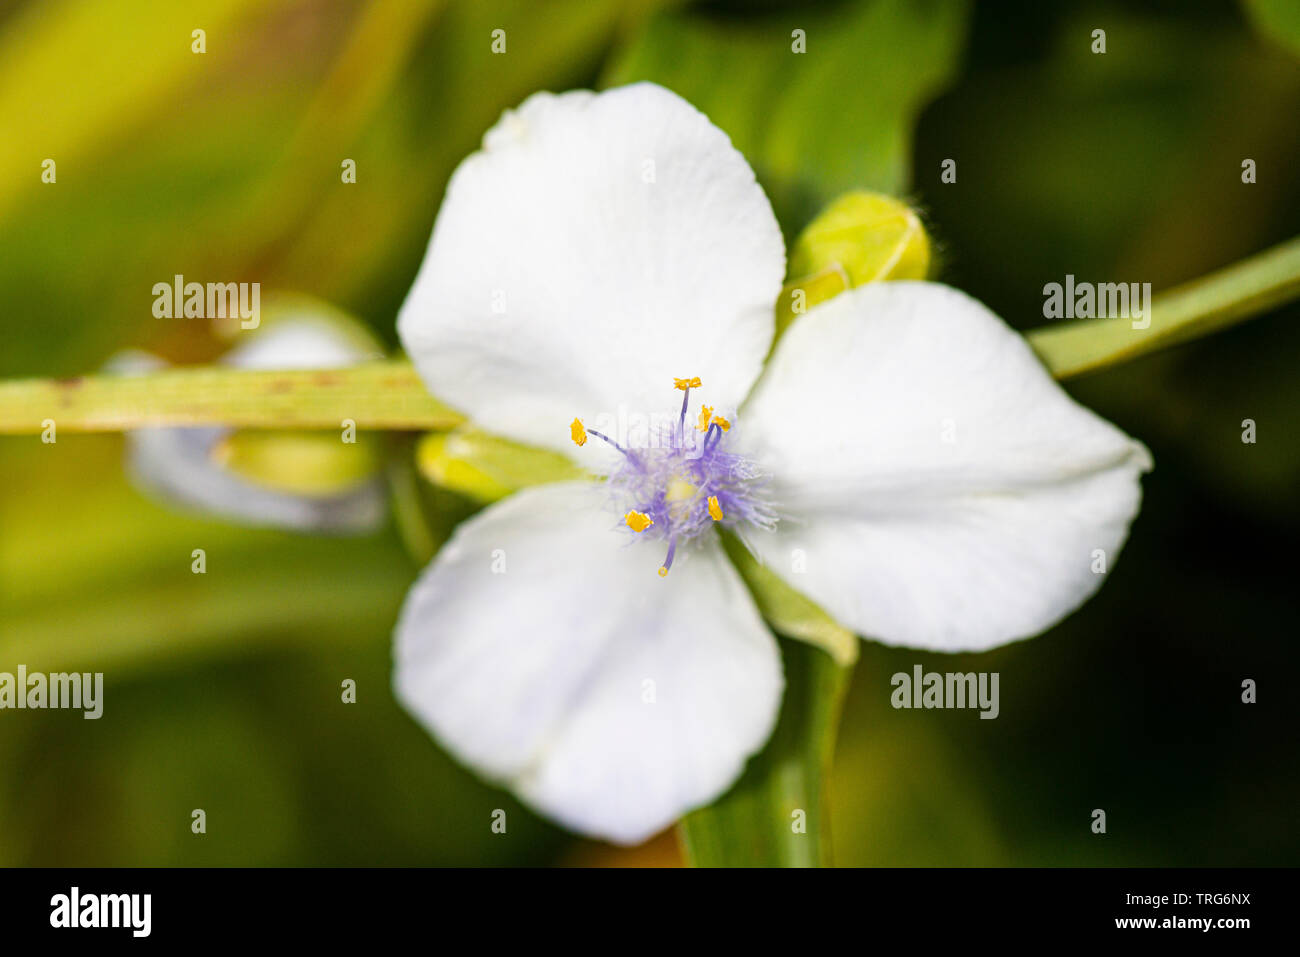 The flower of a spider lily 'Osprey' (Tradescantia 'Osprey') Stock Photo